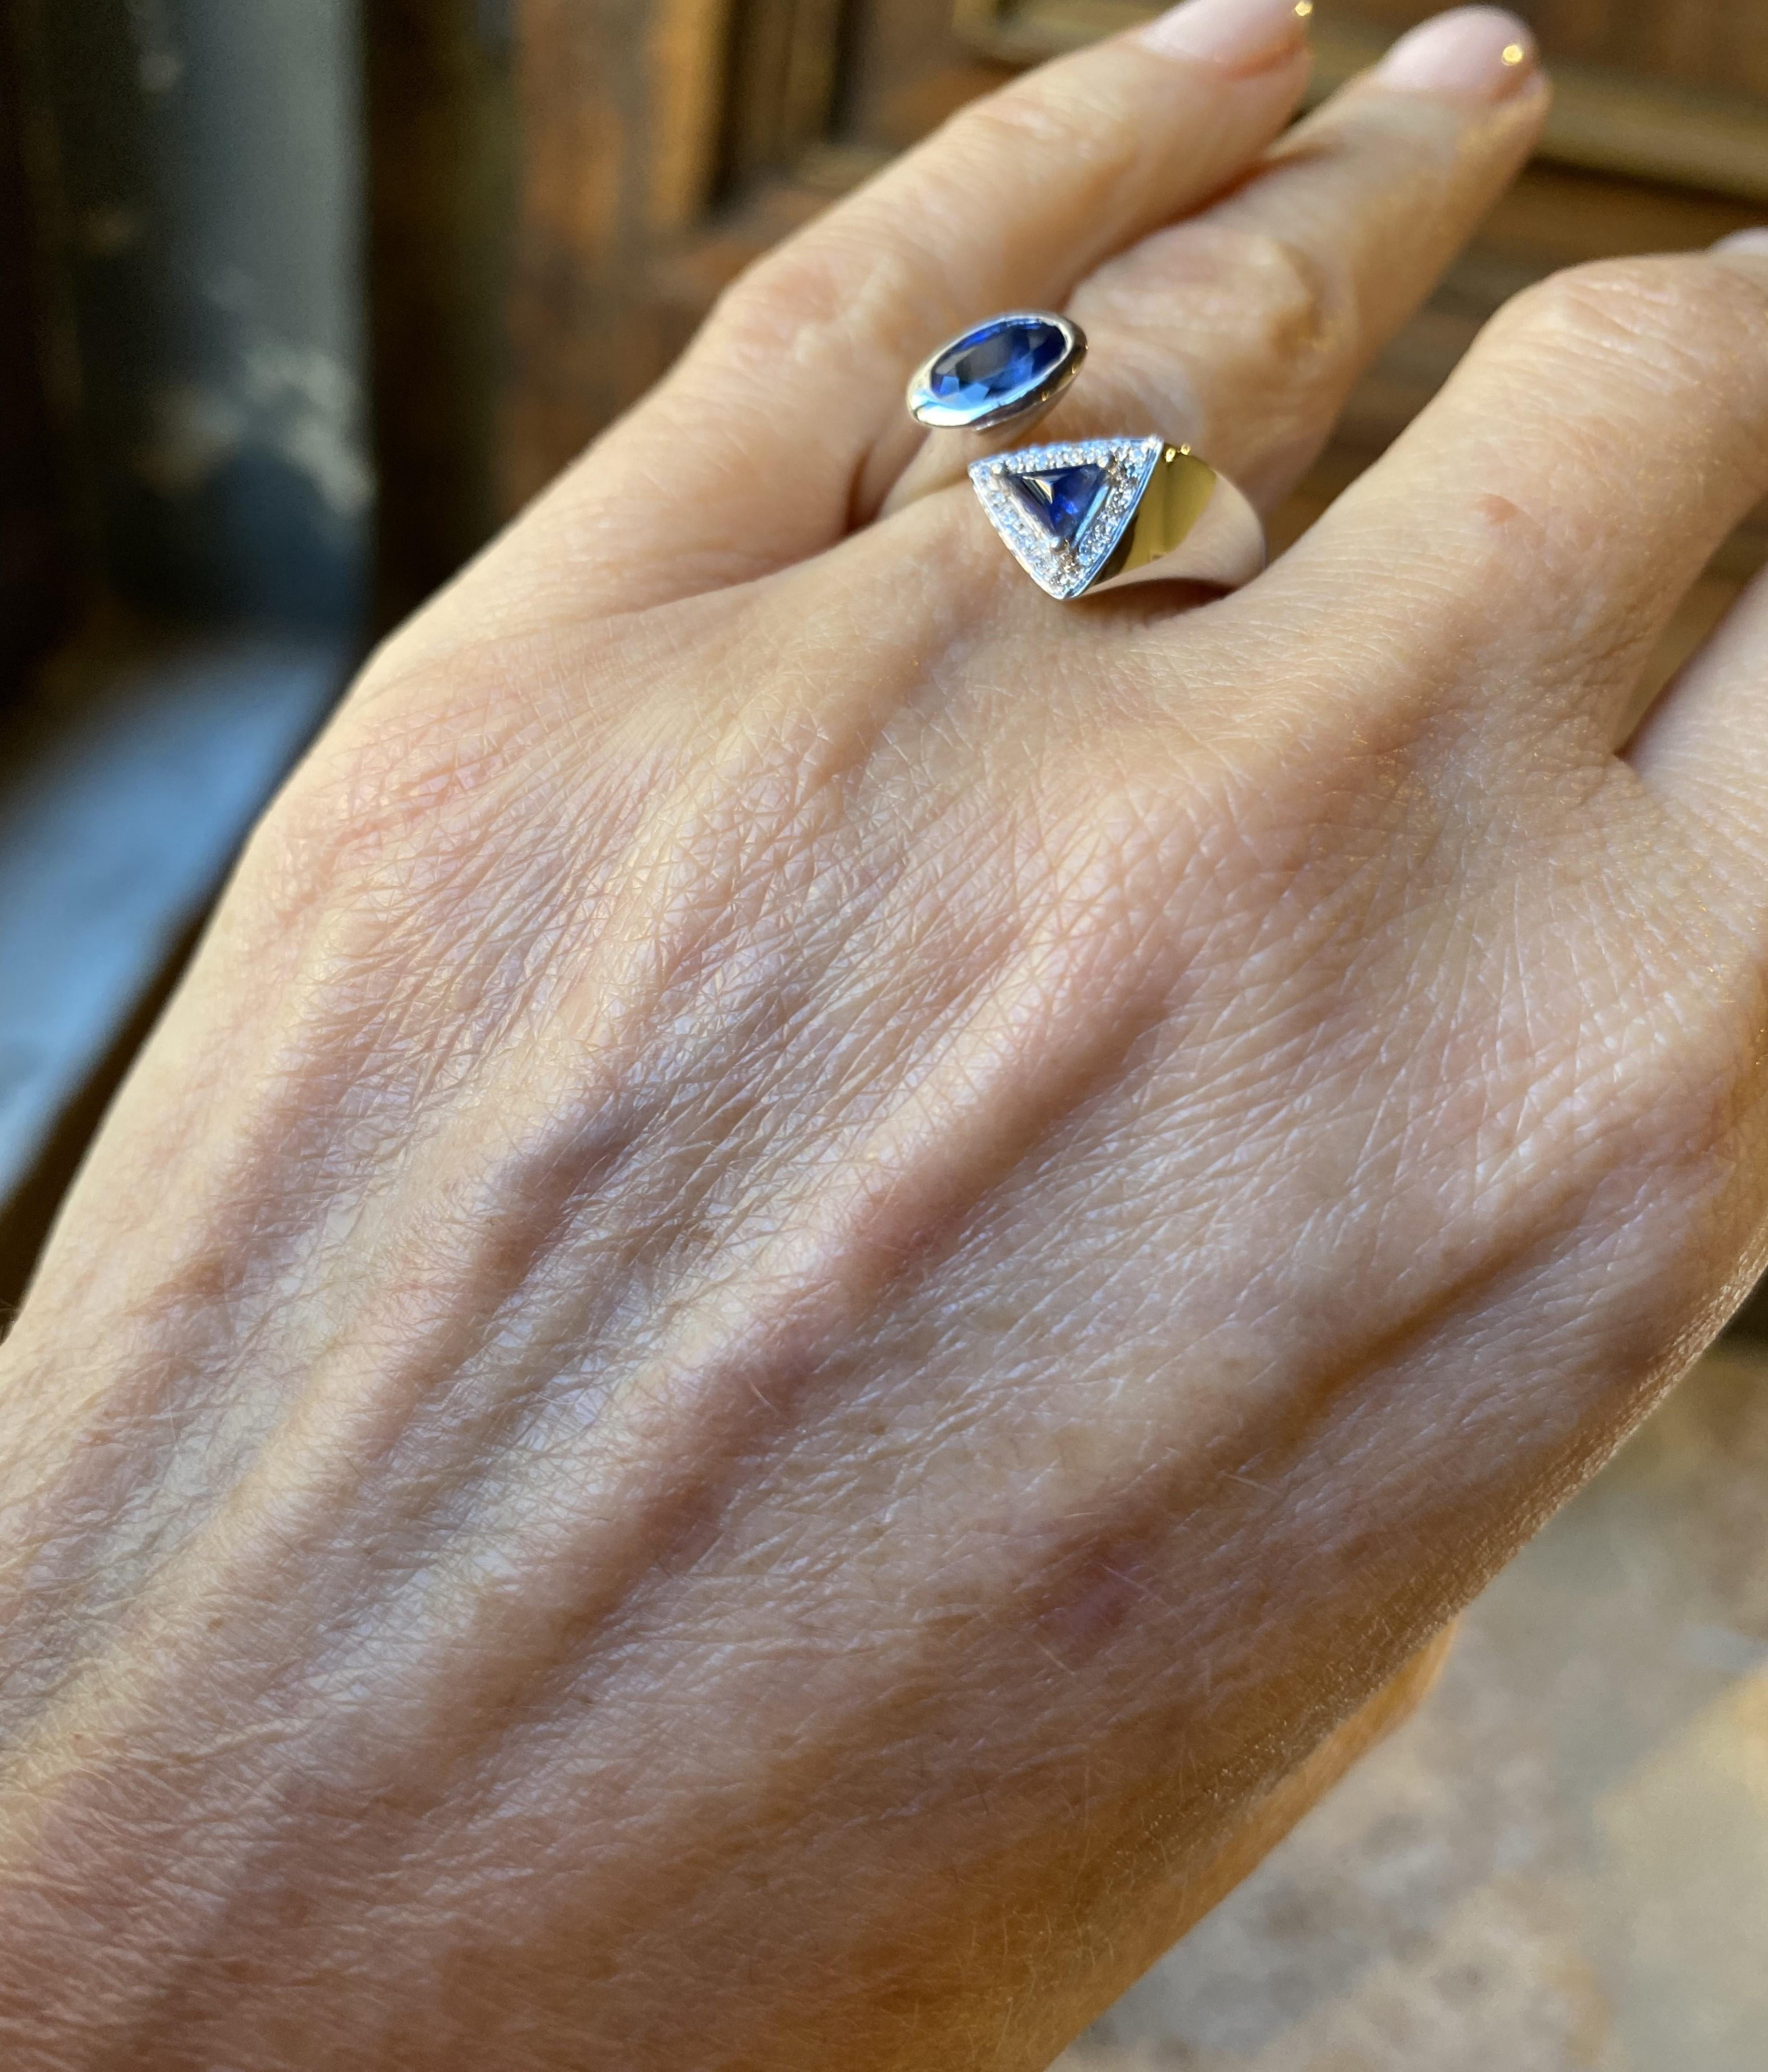 This is a piece from Rossella Ugolini collection of contemporary jewels and is Handcrafted in Platinum with 1.20 Karats Sapphire and 0.075 White Diamonds , for a Contemporary Contraire Design Ring.
A beautiful sapphire design ring handcrafted in